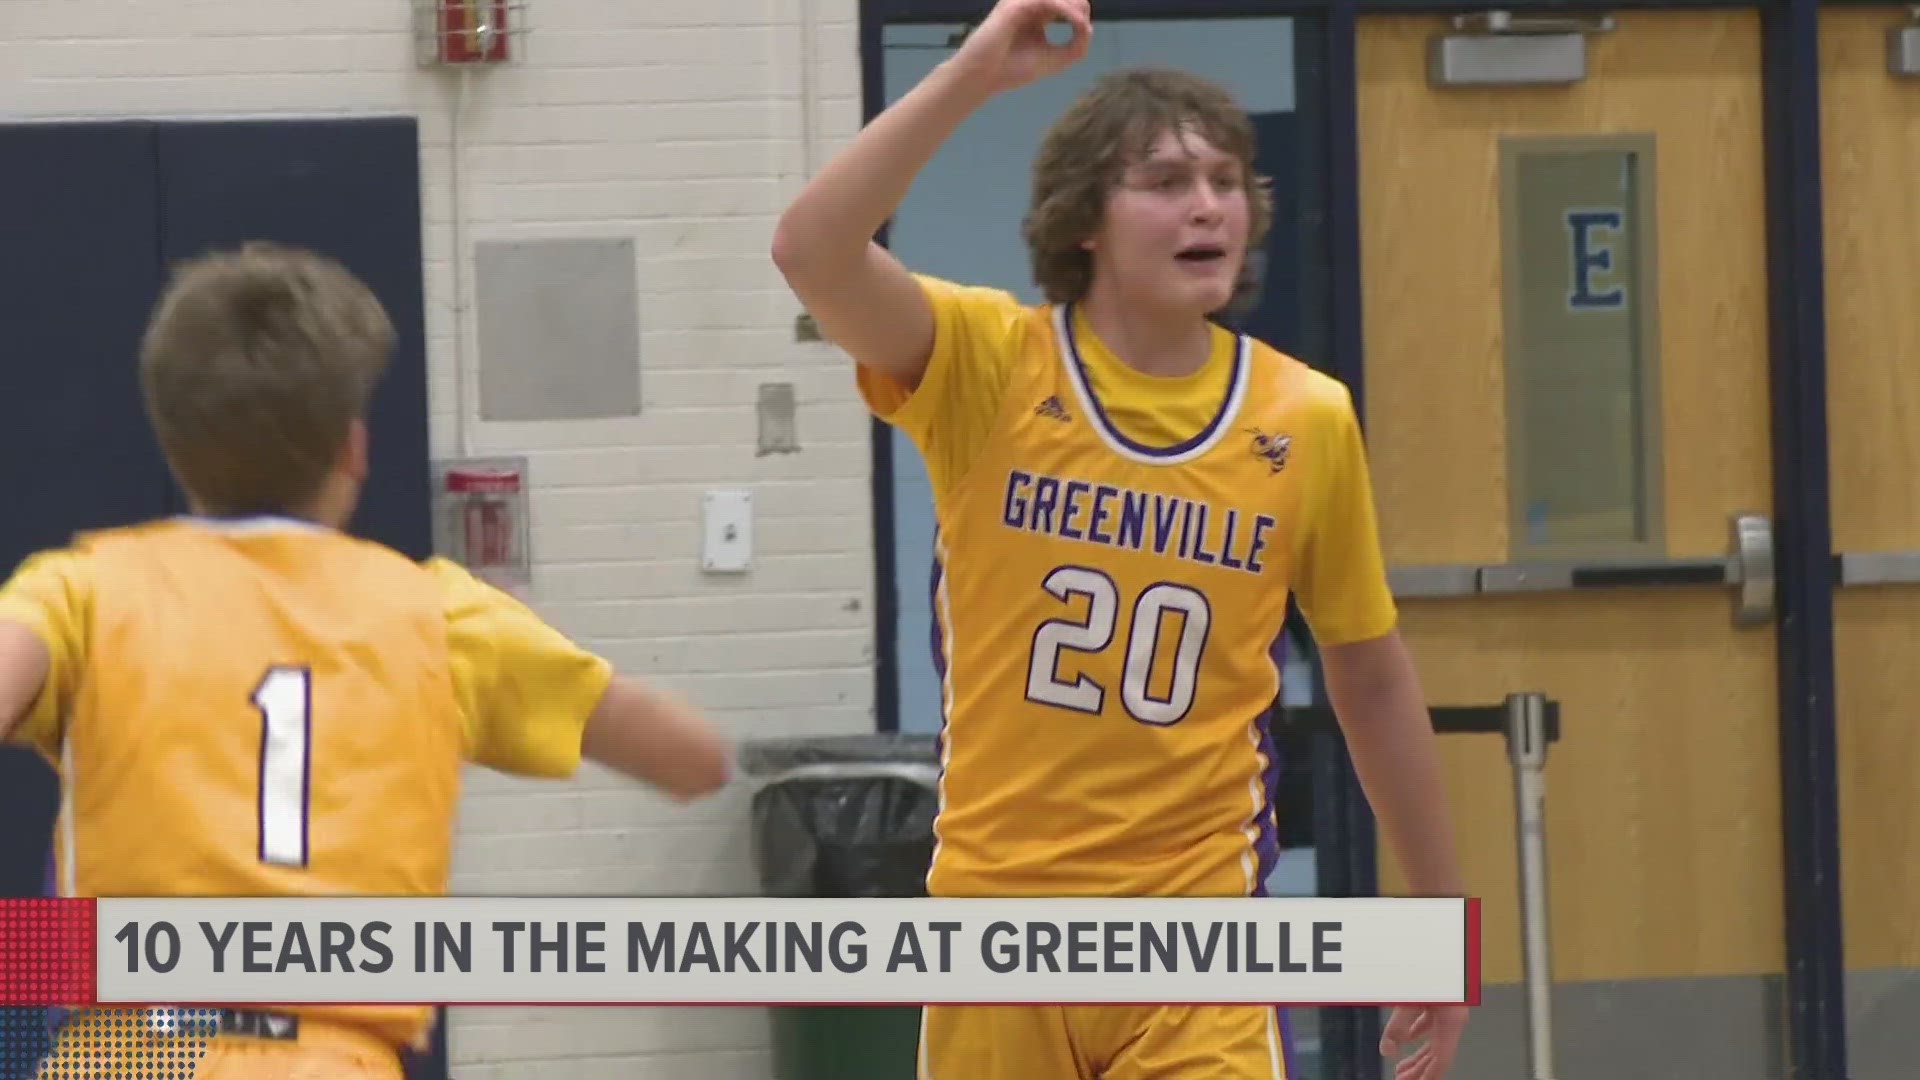 The Greenville High School boys basketball team is having a season that is a decade in the making.